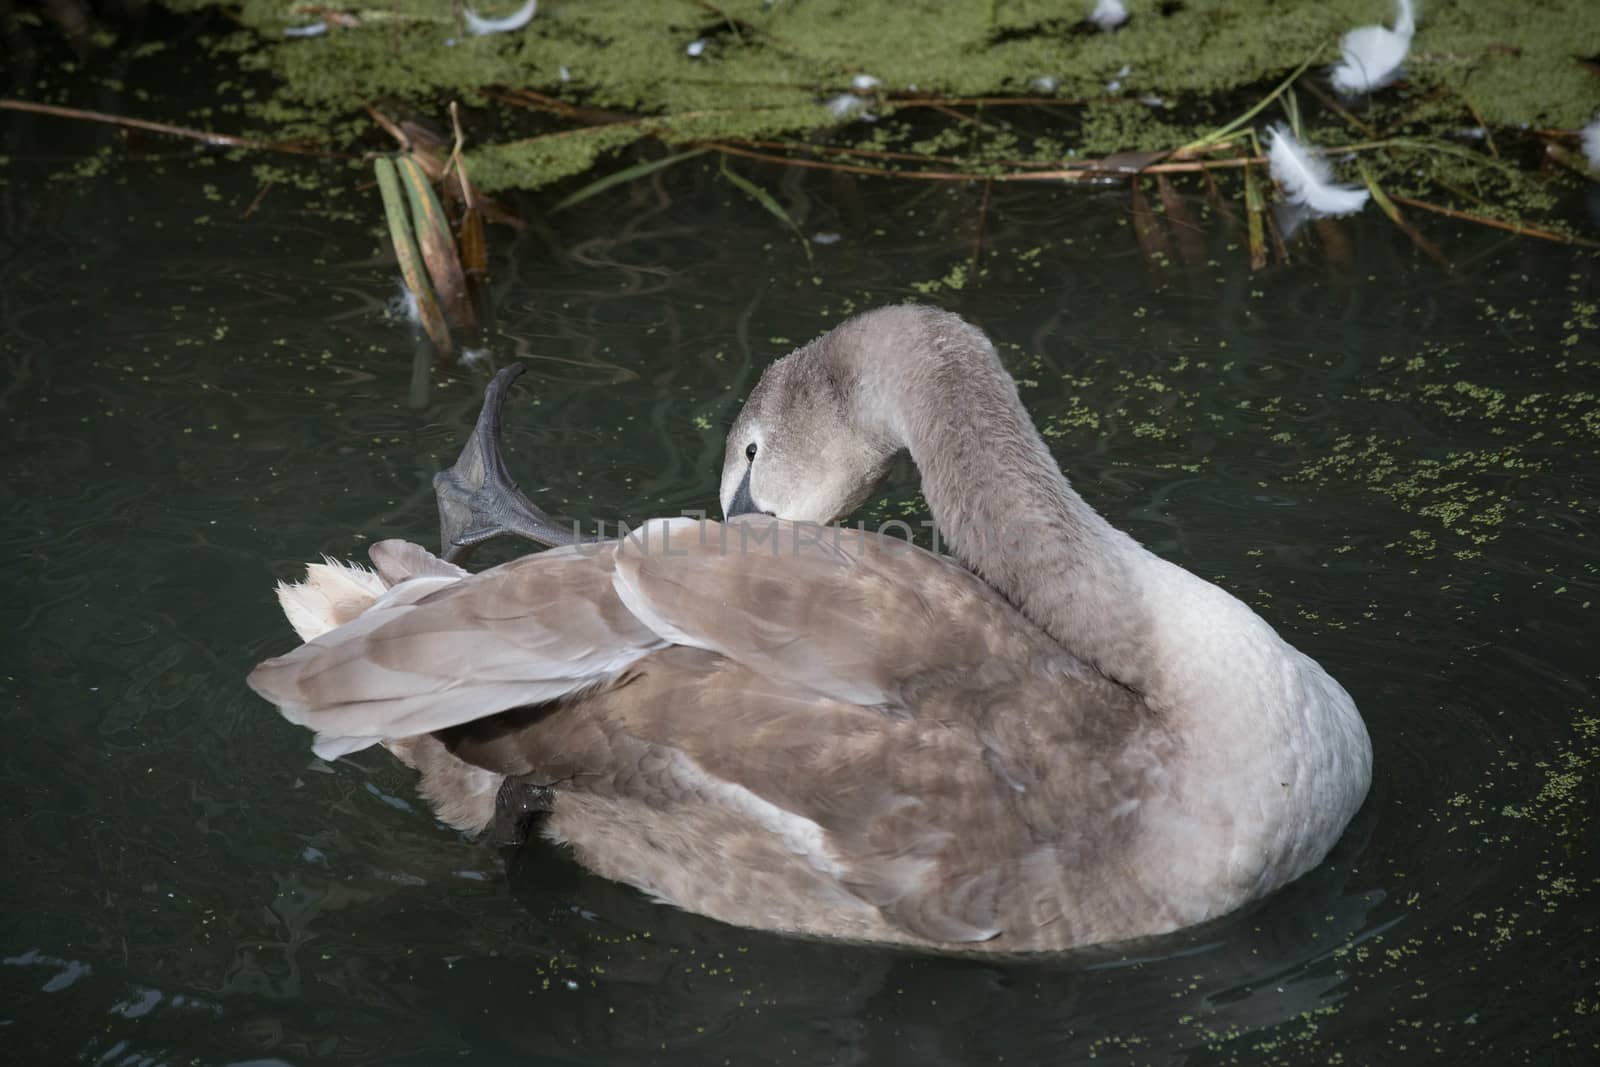 Cygnet preens her feathers by riverheron_photos